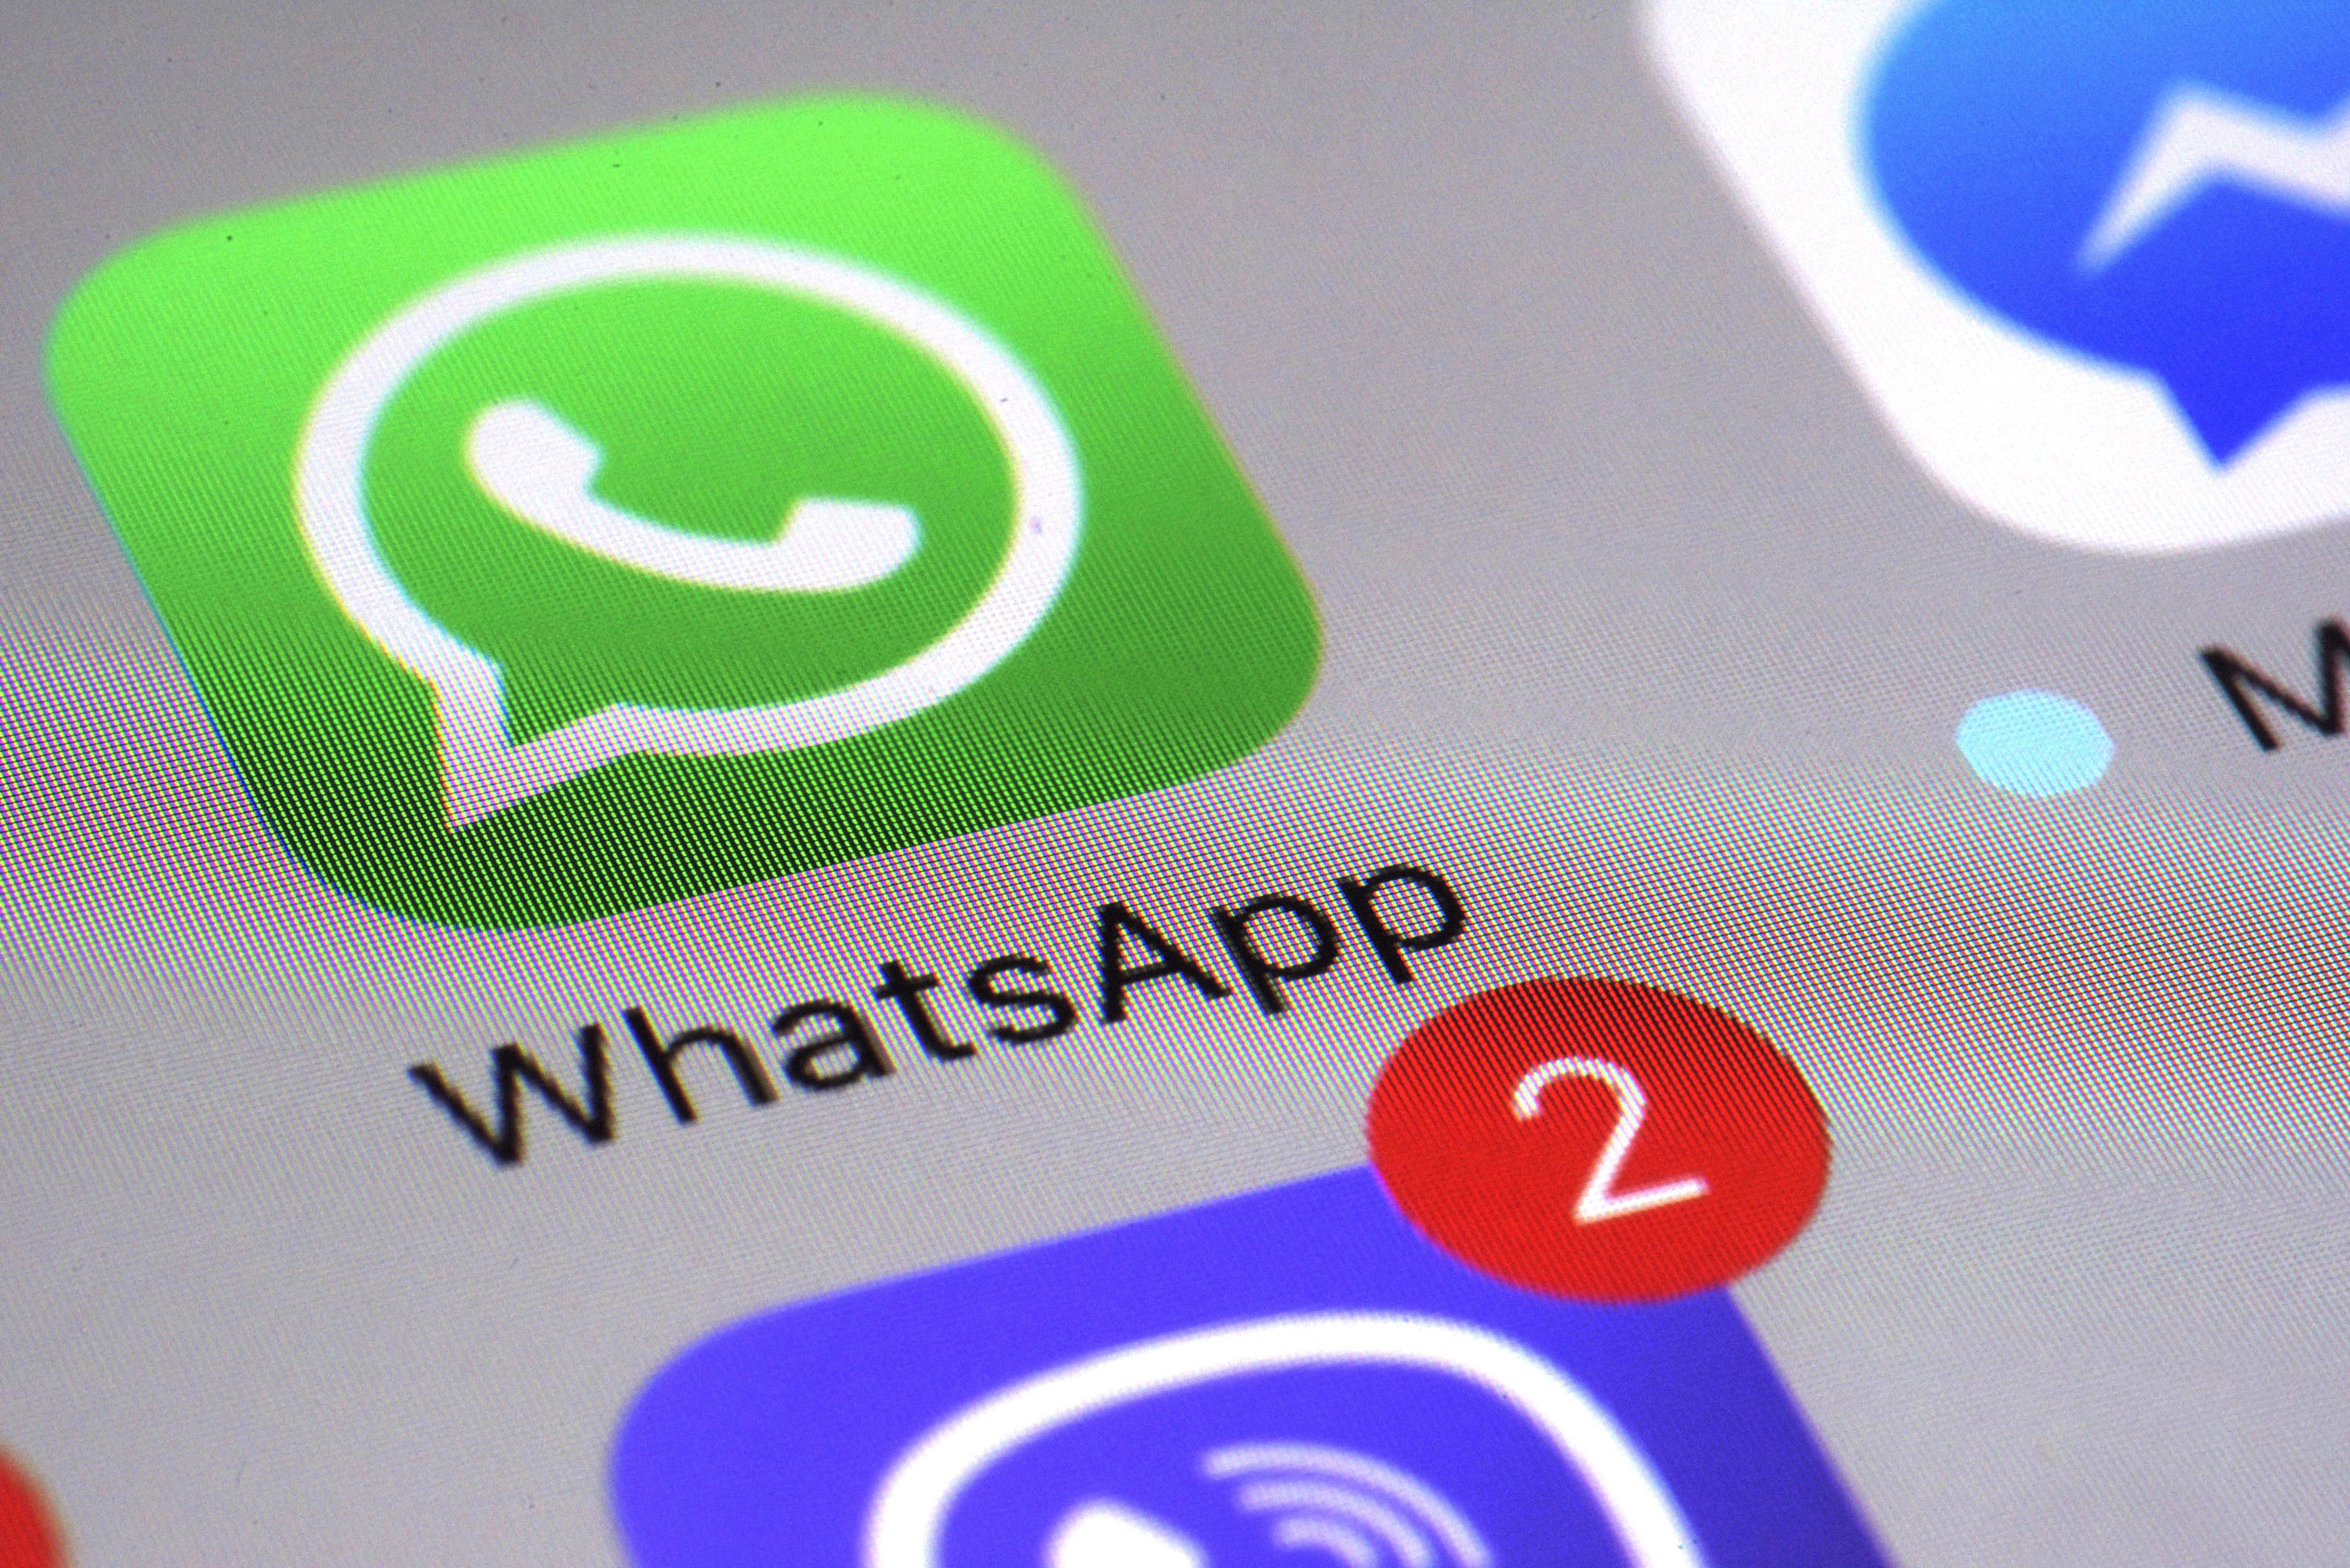 WhatsApp says it’s back online after global outage